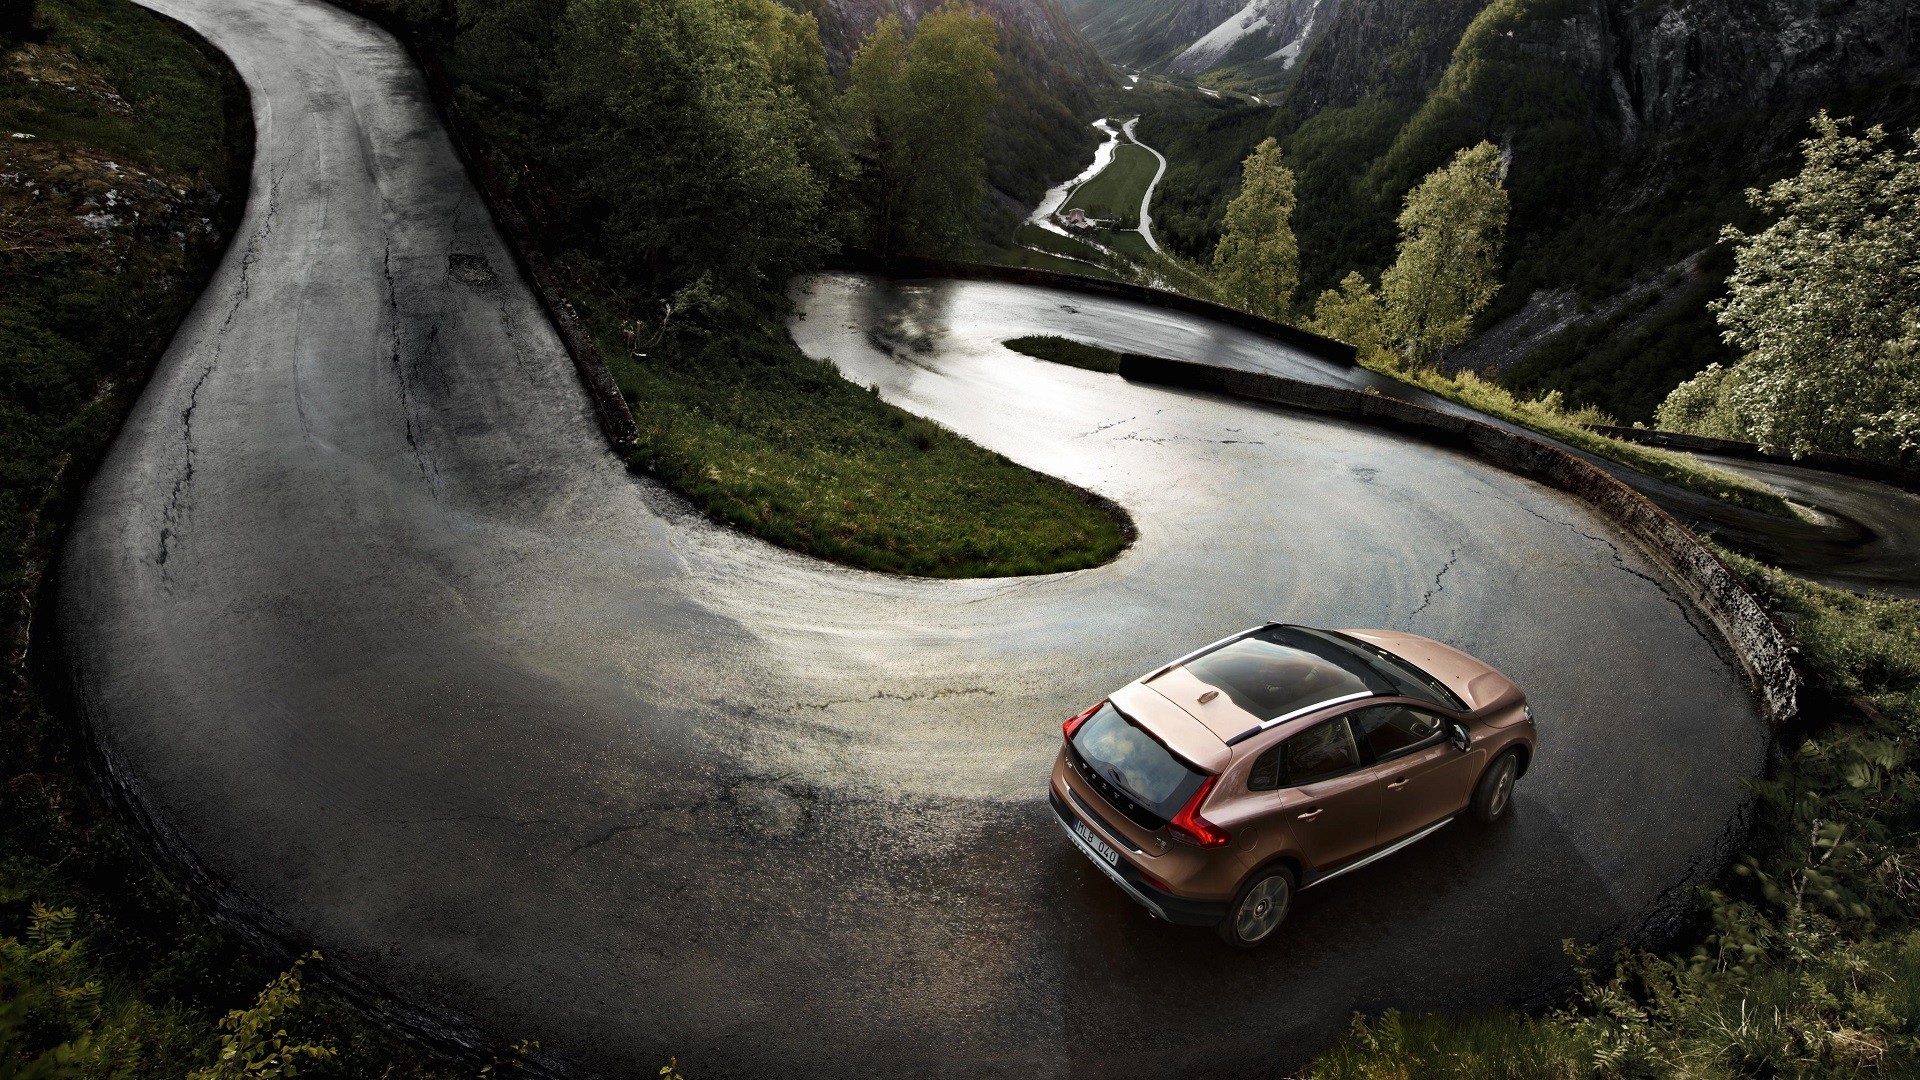 General 1920x1080 car Volvo road landscape river mountains trees hairpin turns asphalt vehicle Swedish cars